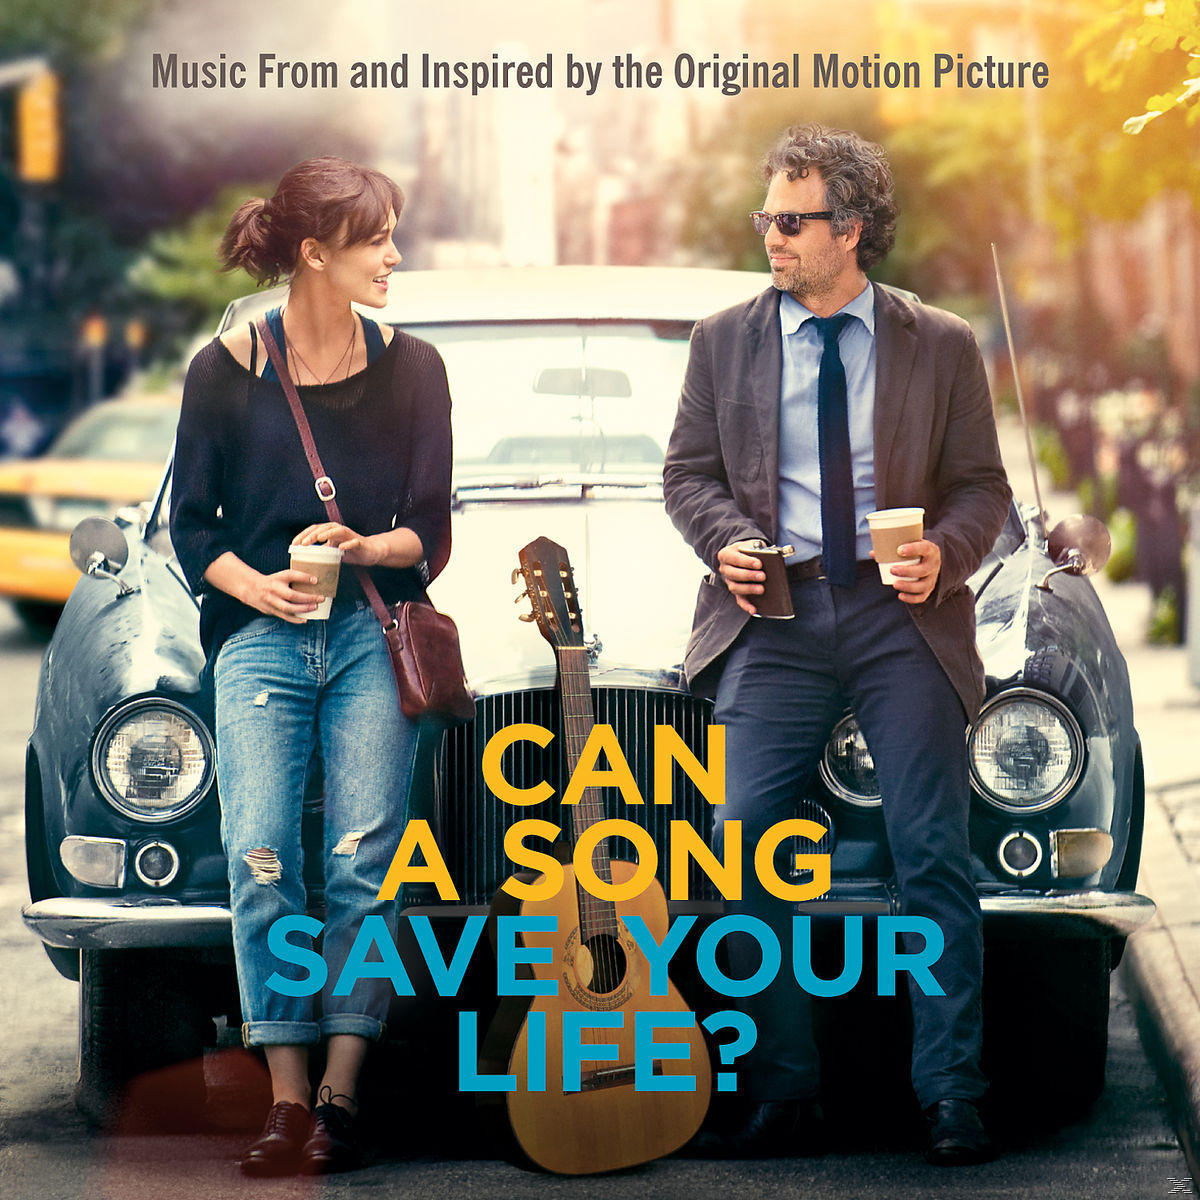 Can Life? Your Song (CD) - VARIOUS A - Save